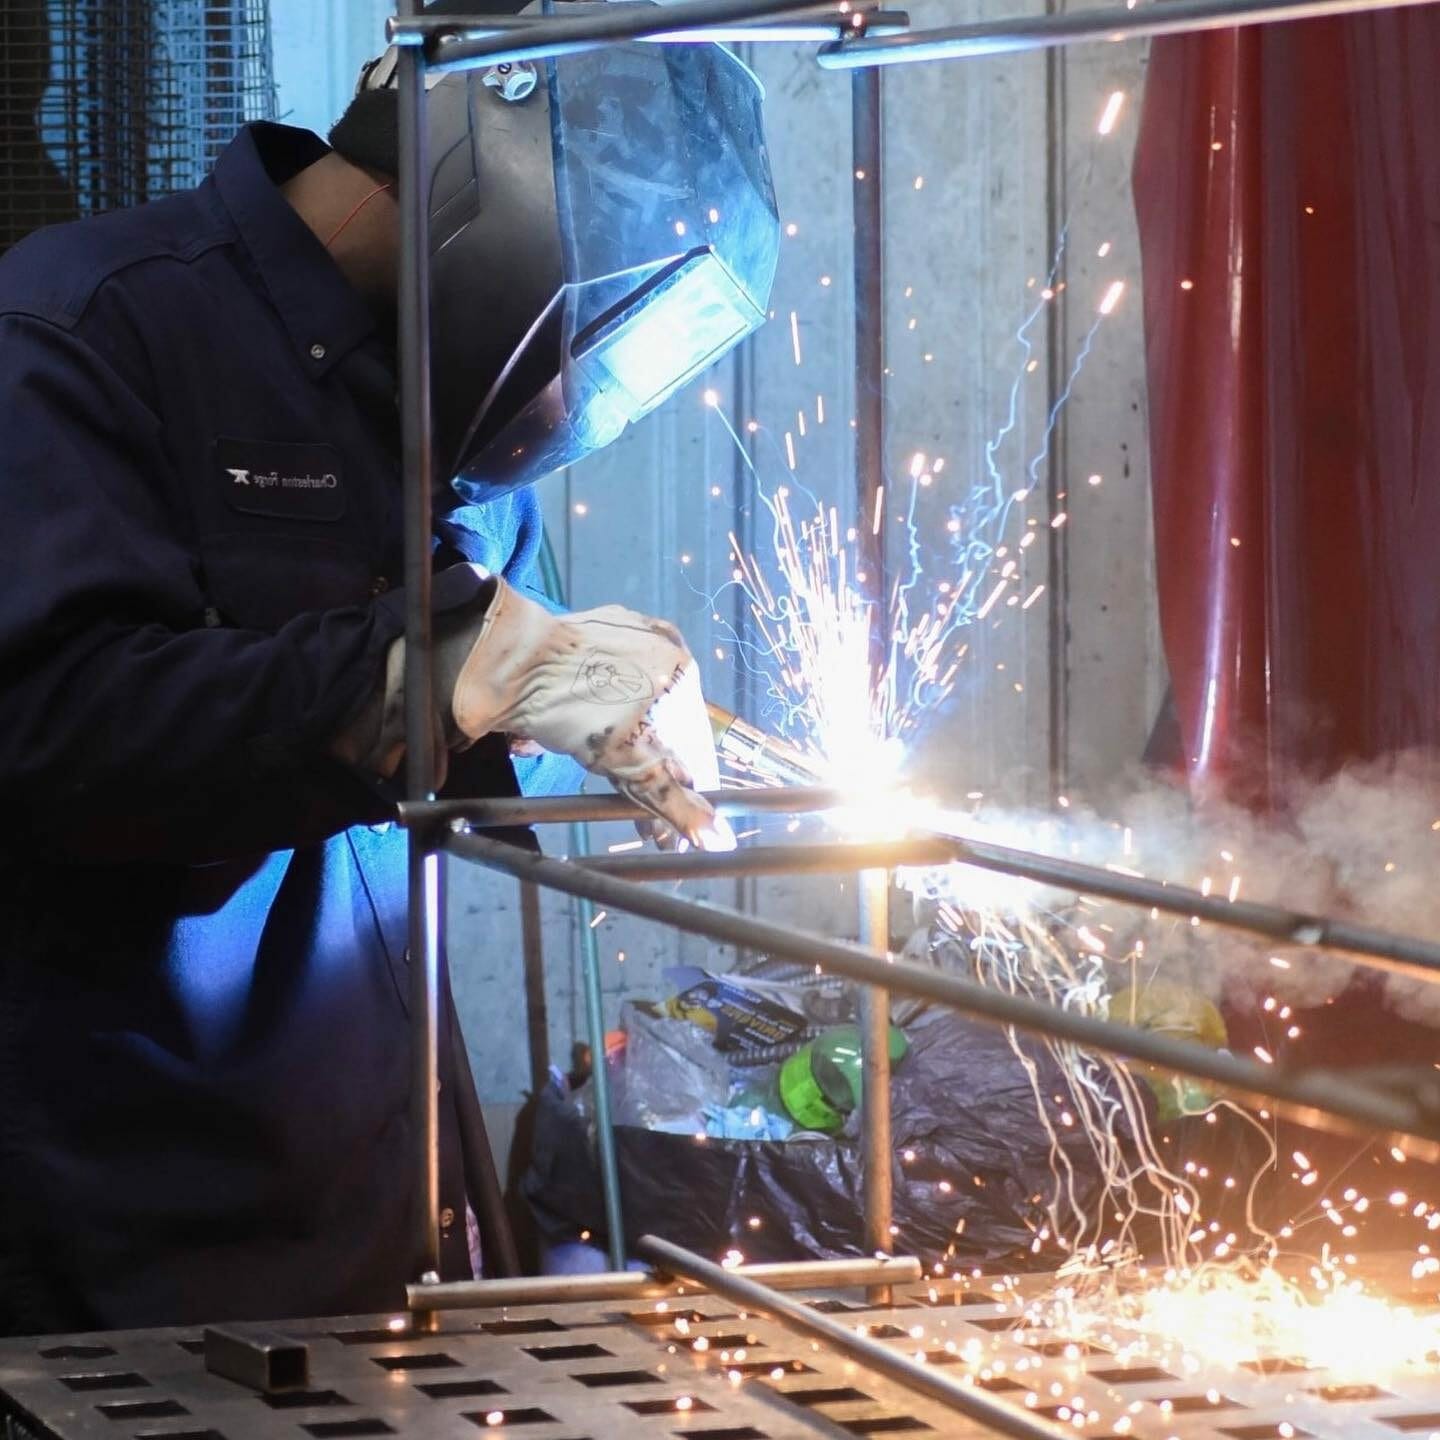 Sparks fly as a Stoneline Designs welder puts the finishing touches on a piece of custom executive office furniture.